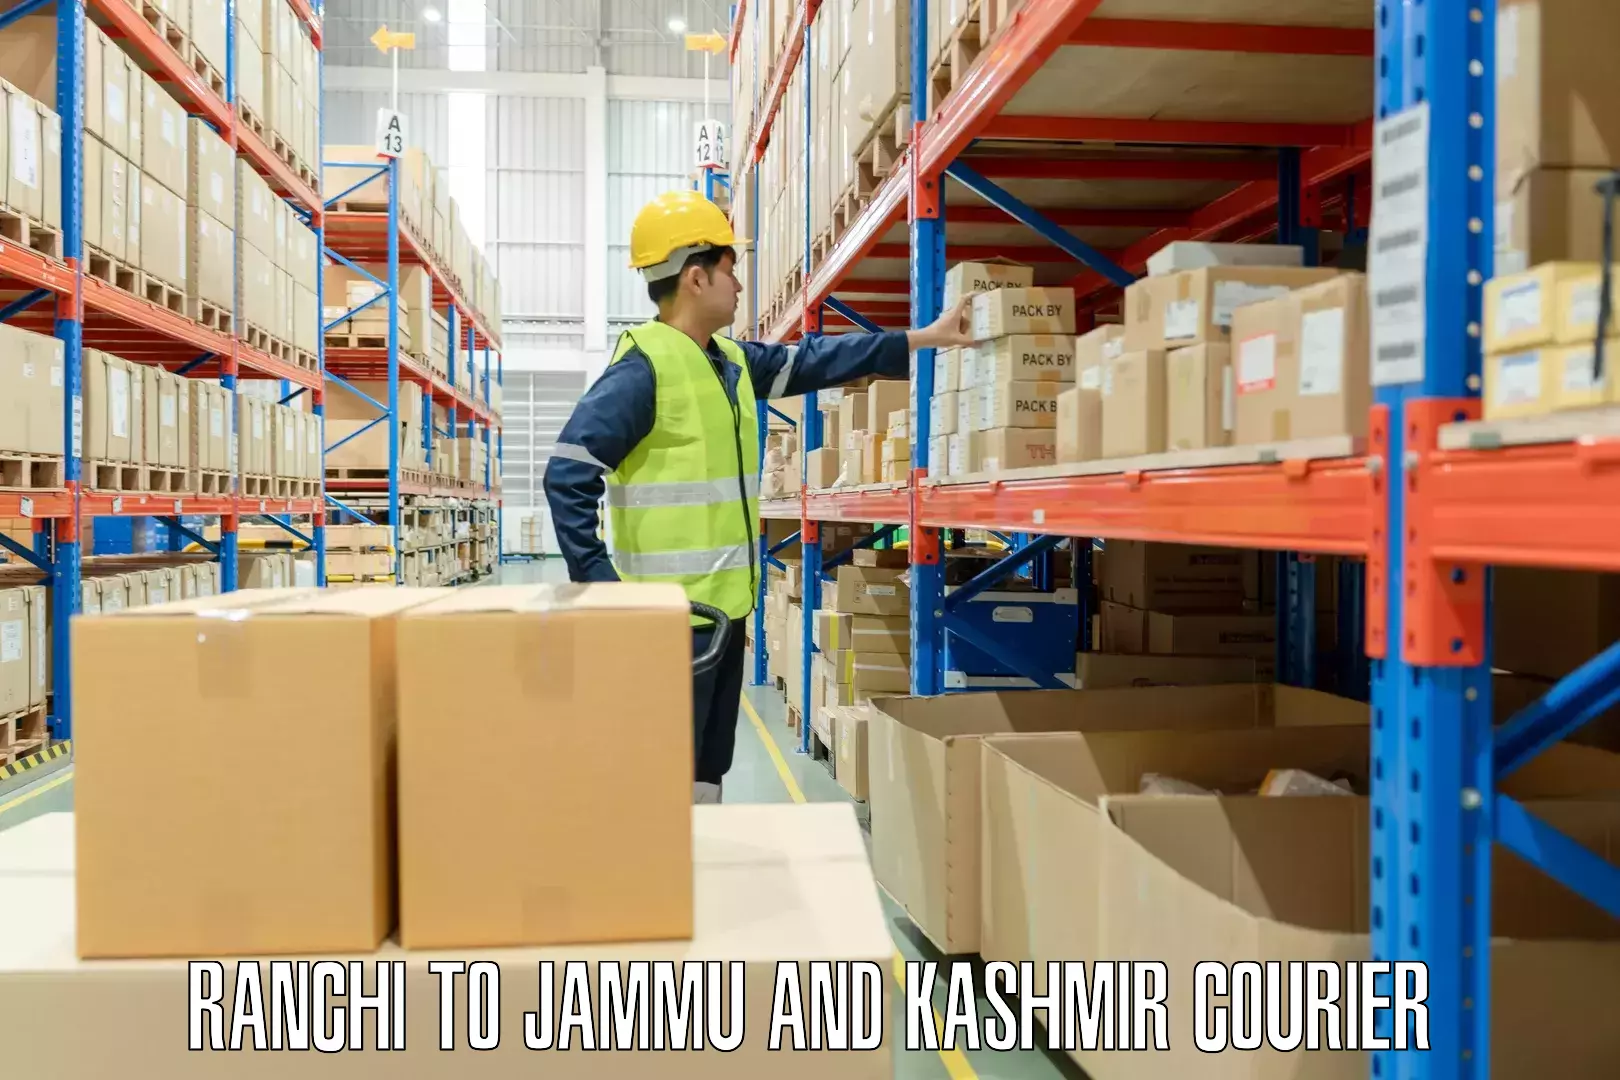 Baggage relocation service Ranchi to Jammu and Kashmir